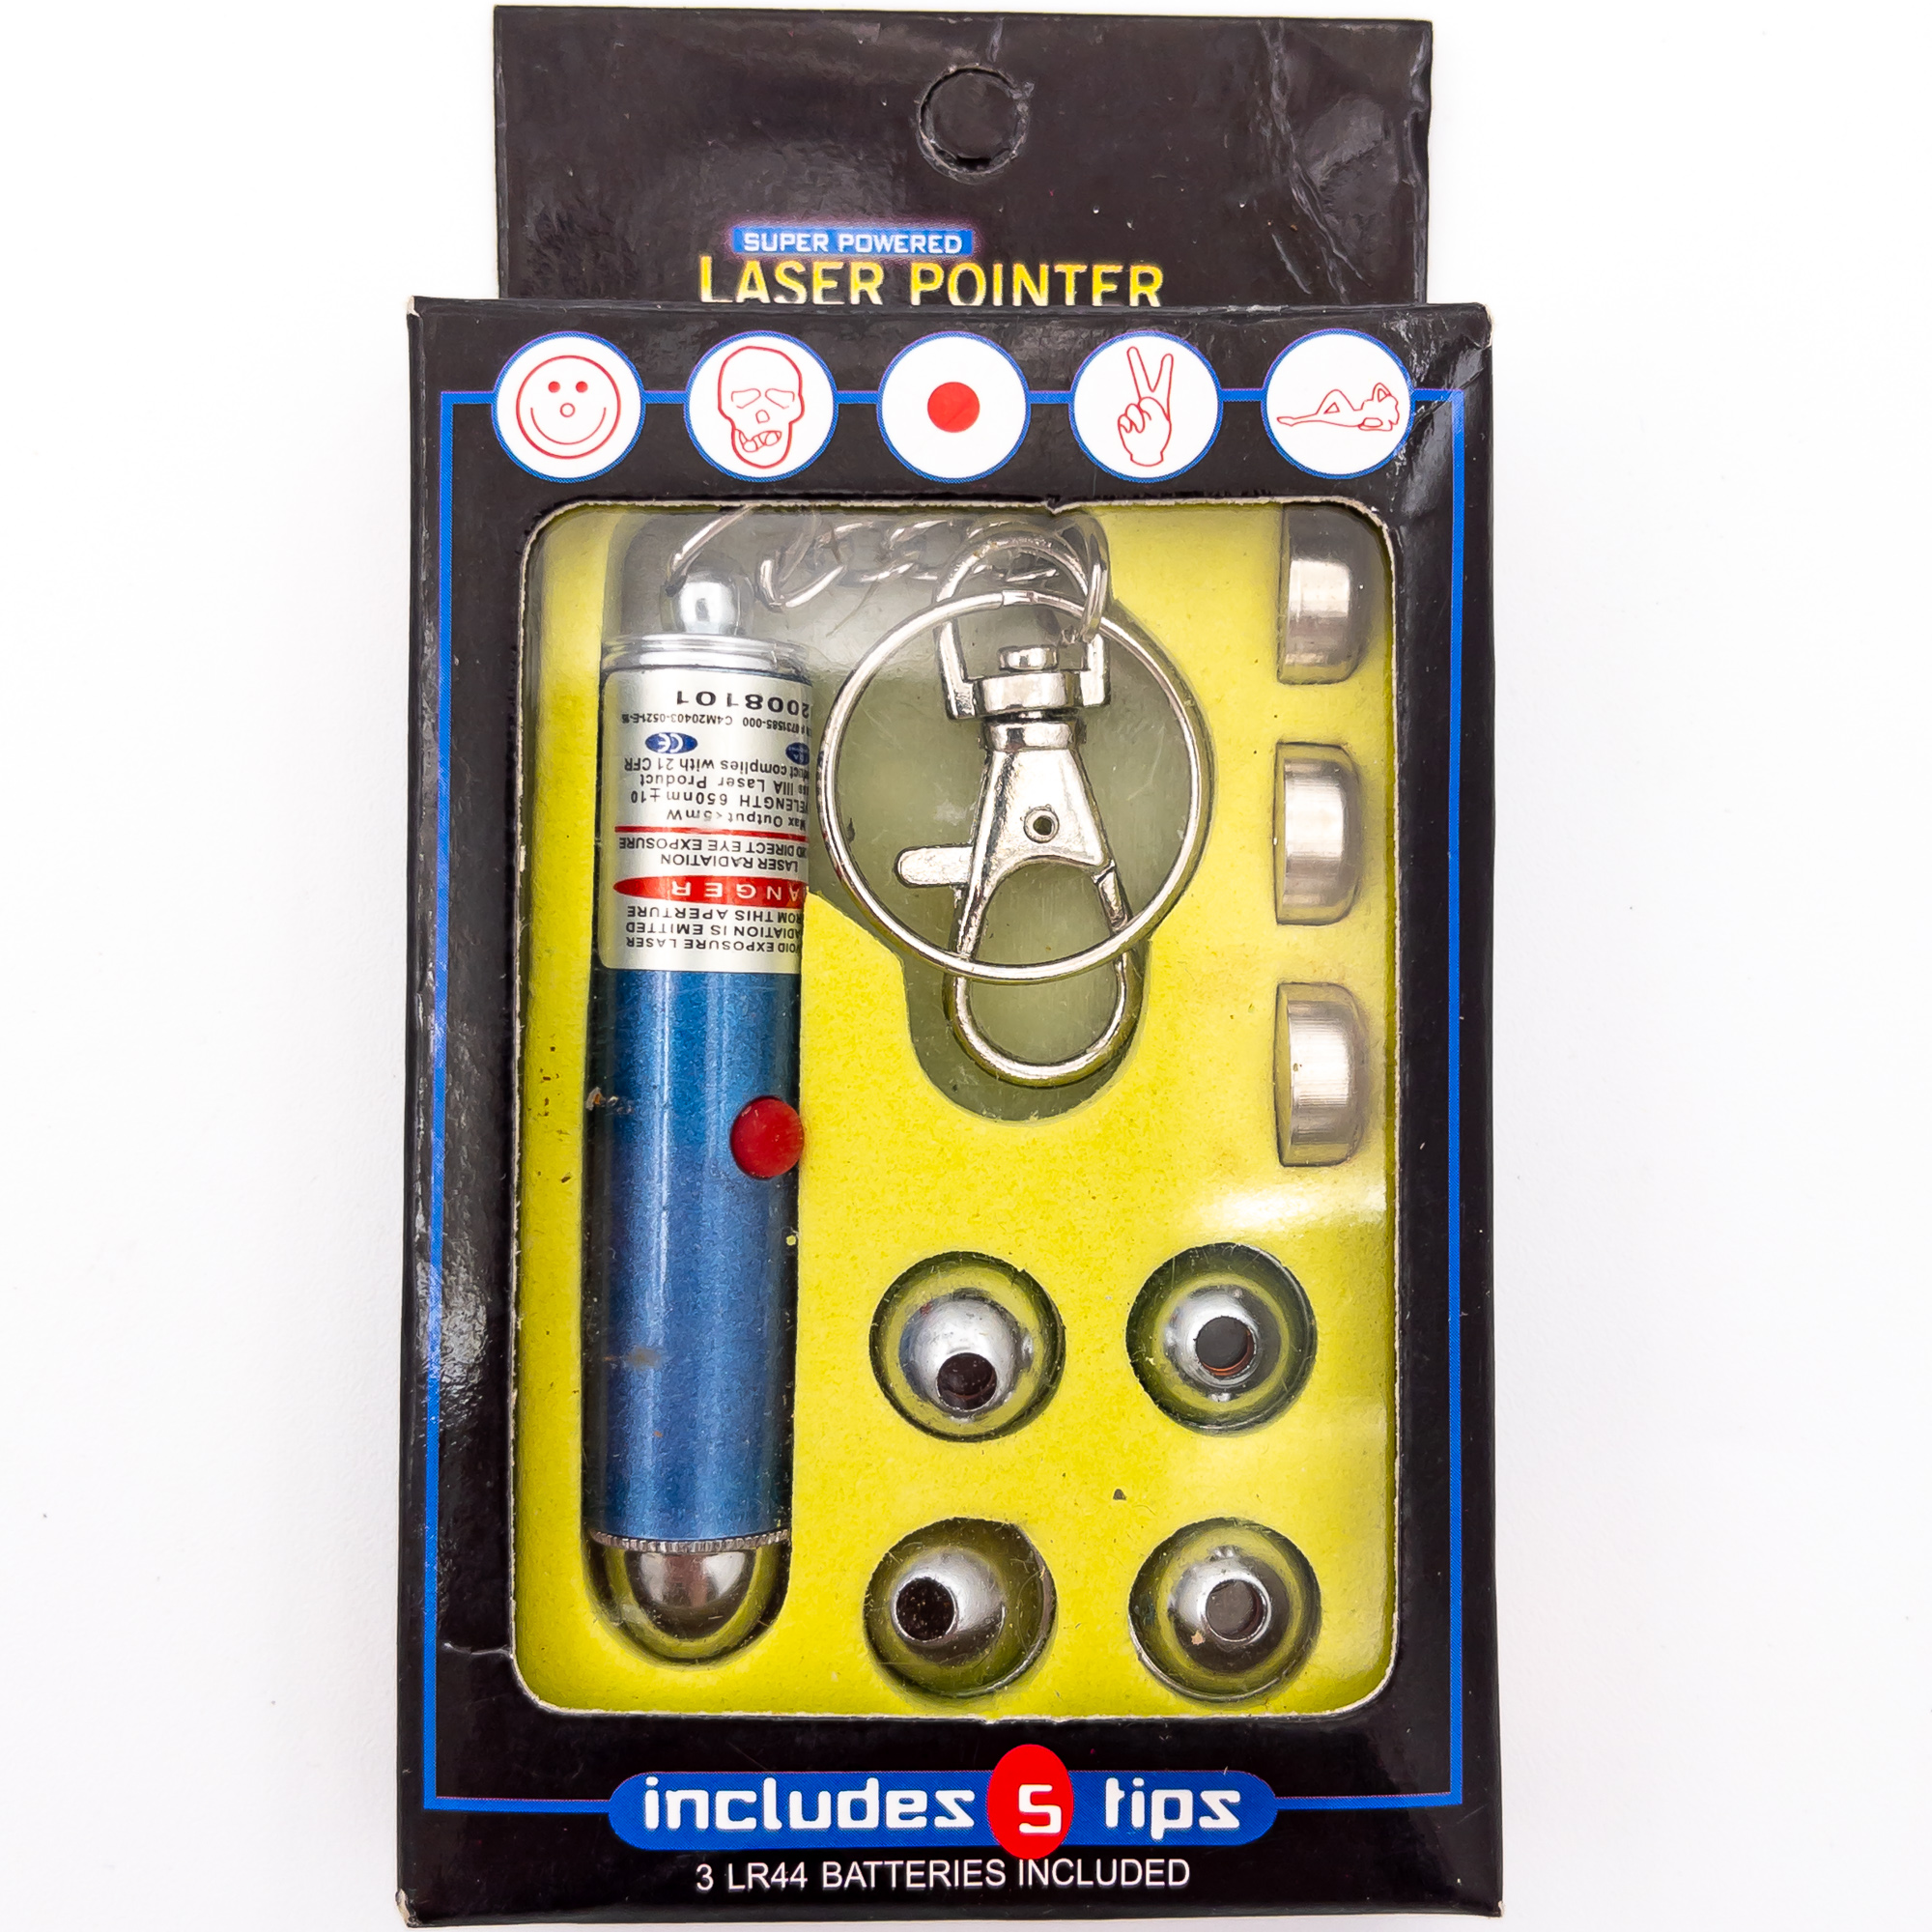 Passing Time Blue Novelty Laser Pointer KEYCHAIN with 5 Different Tips